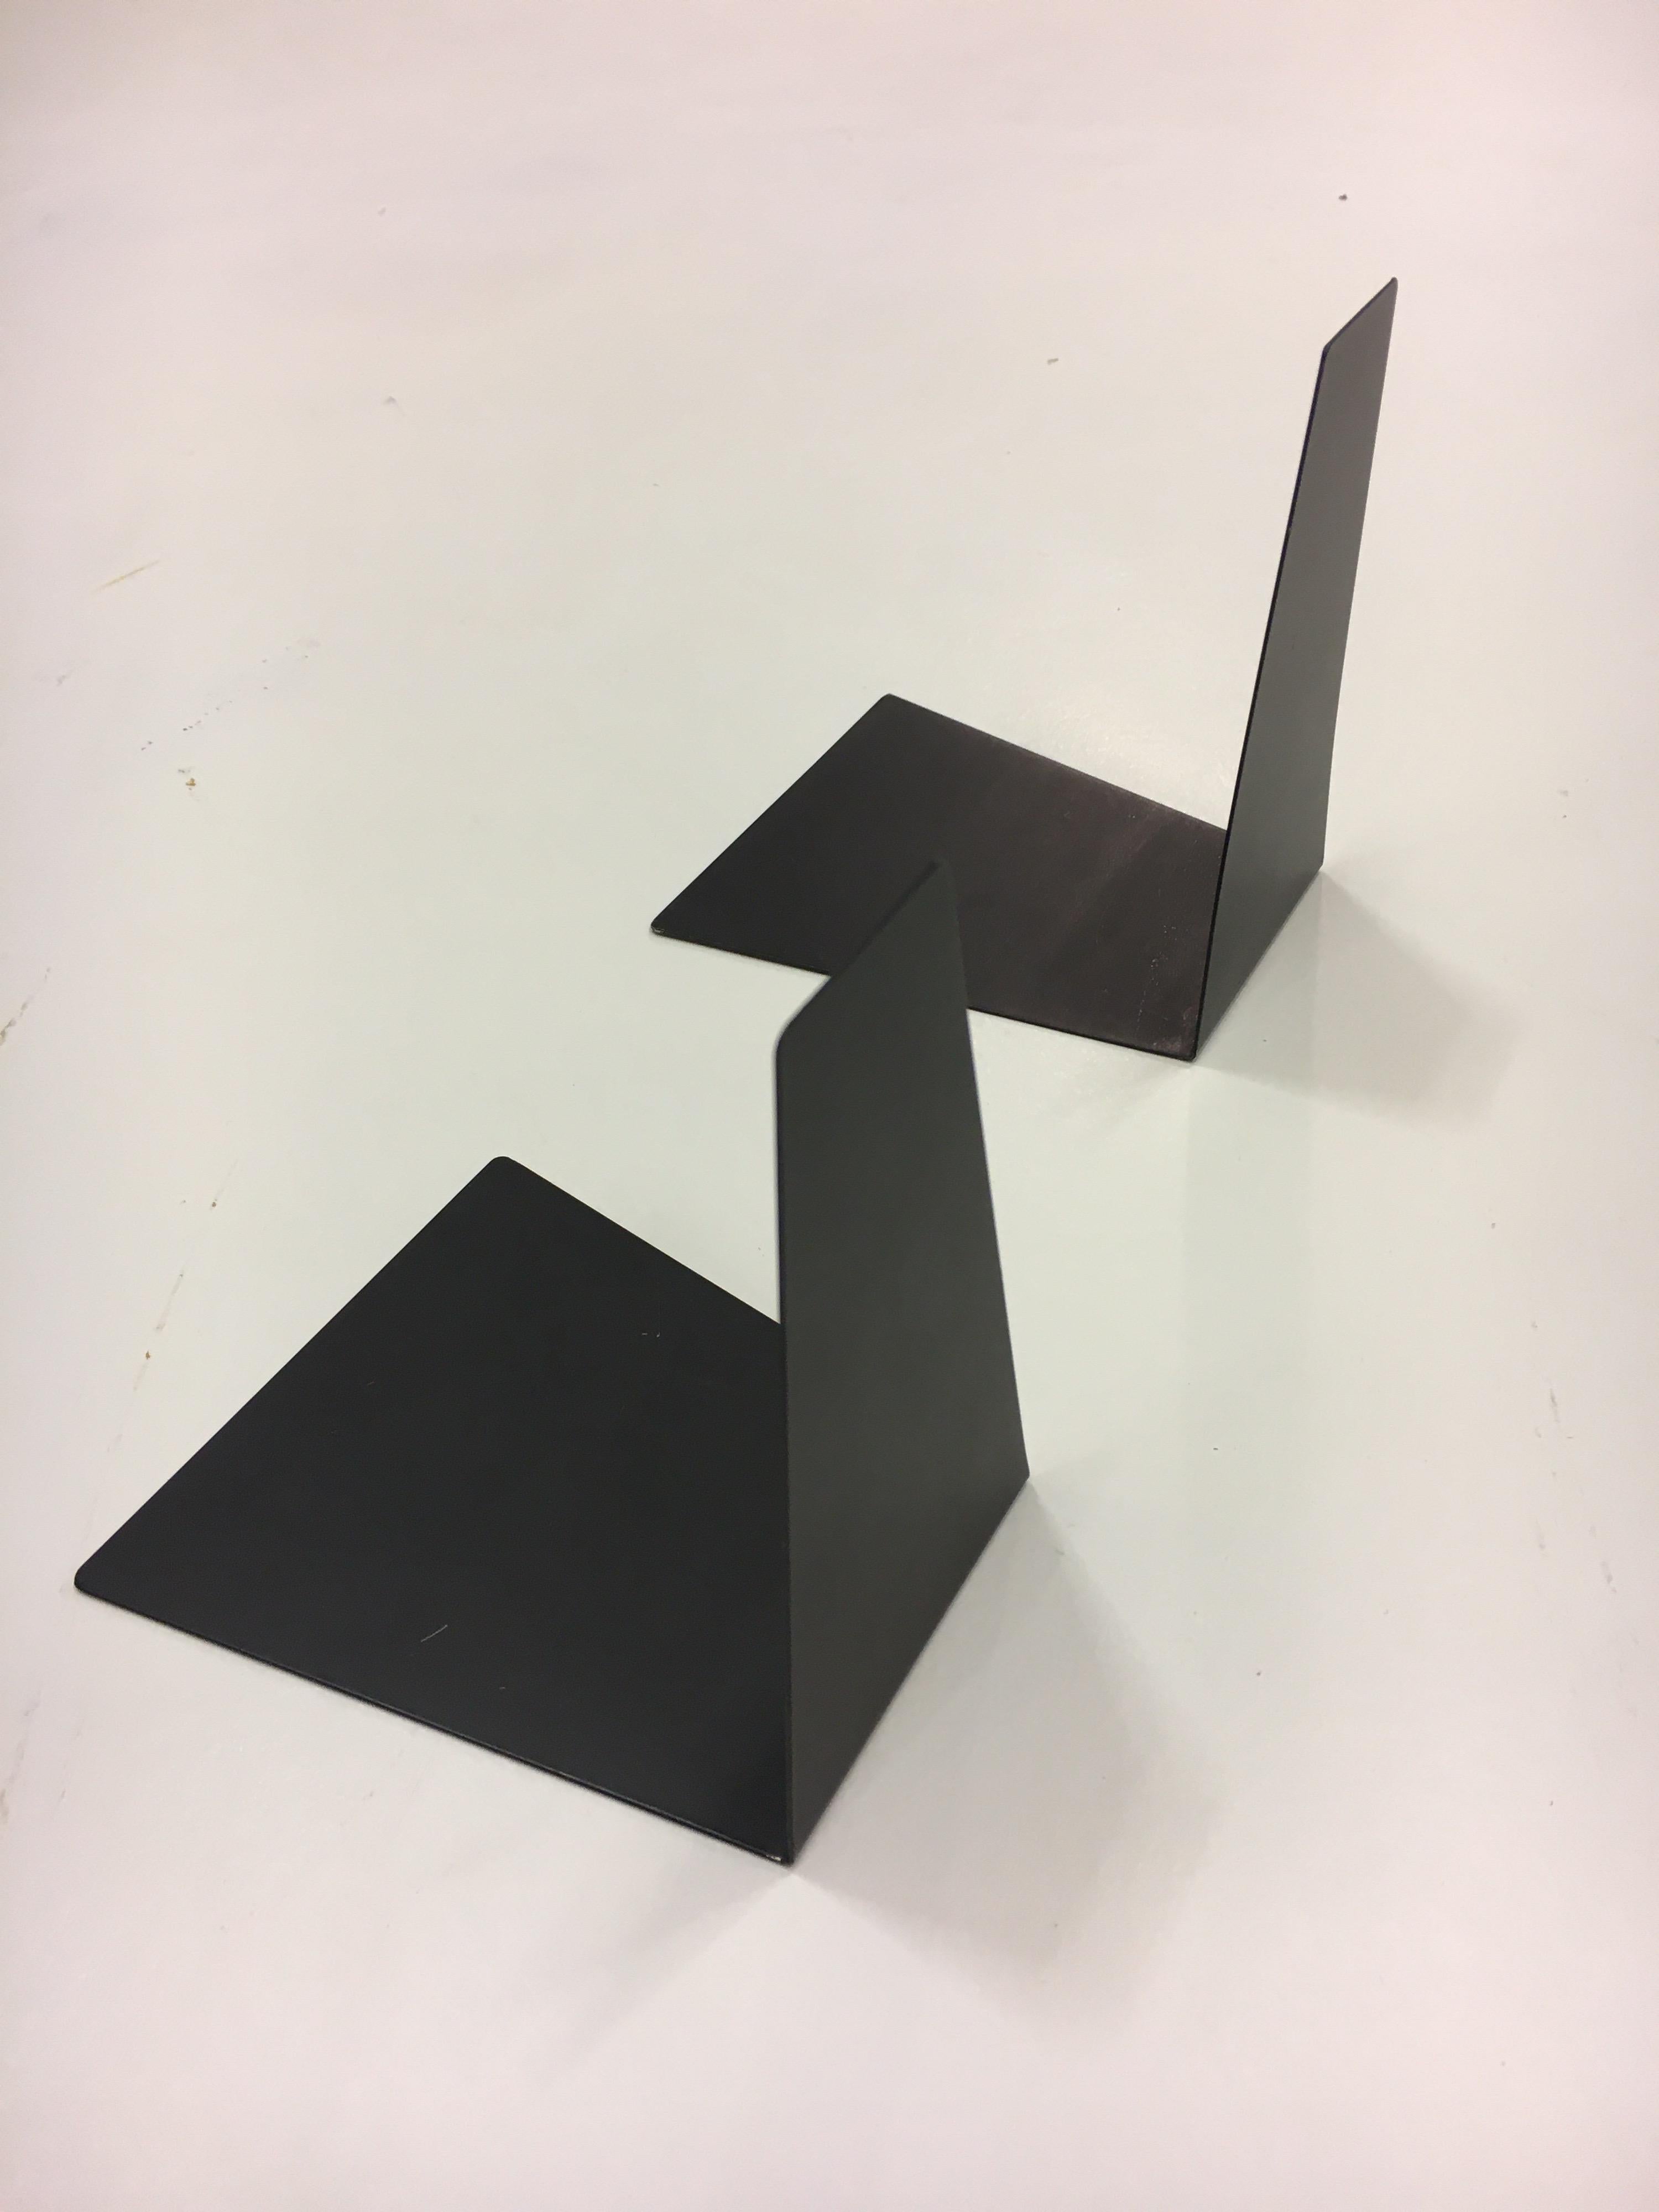 Bauhaus Black Metal Bookends by Marianne Brandt, 1930s for Ruppel, Germany 1